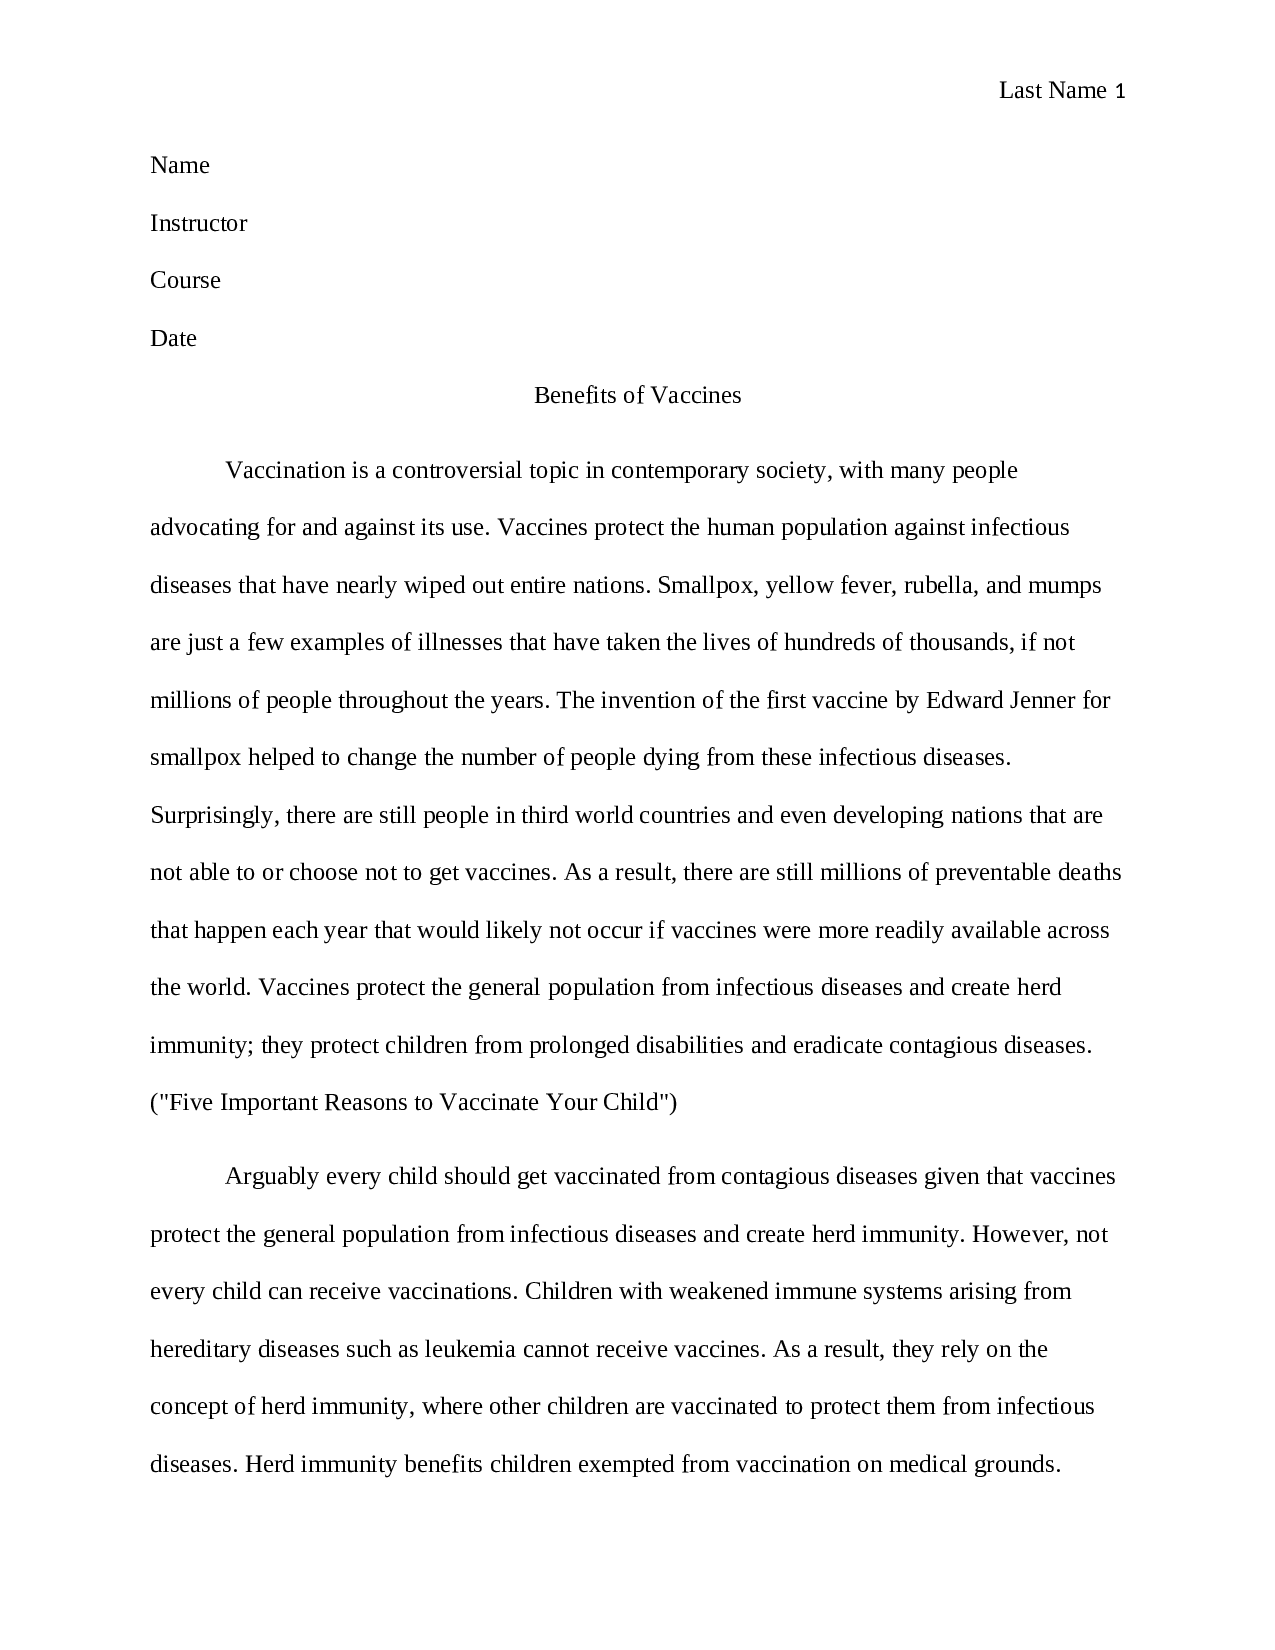 how to write a expository essay example